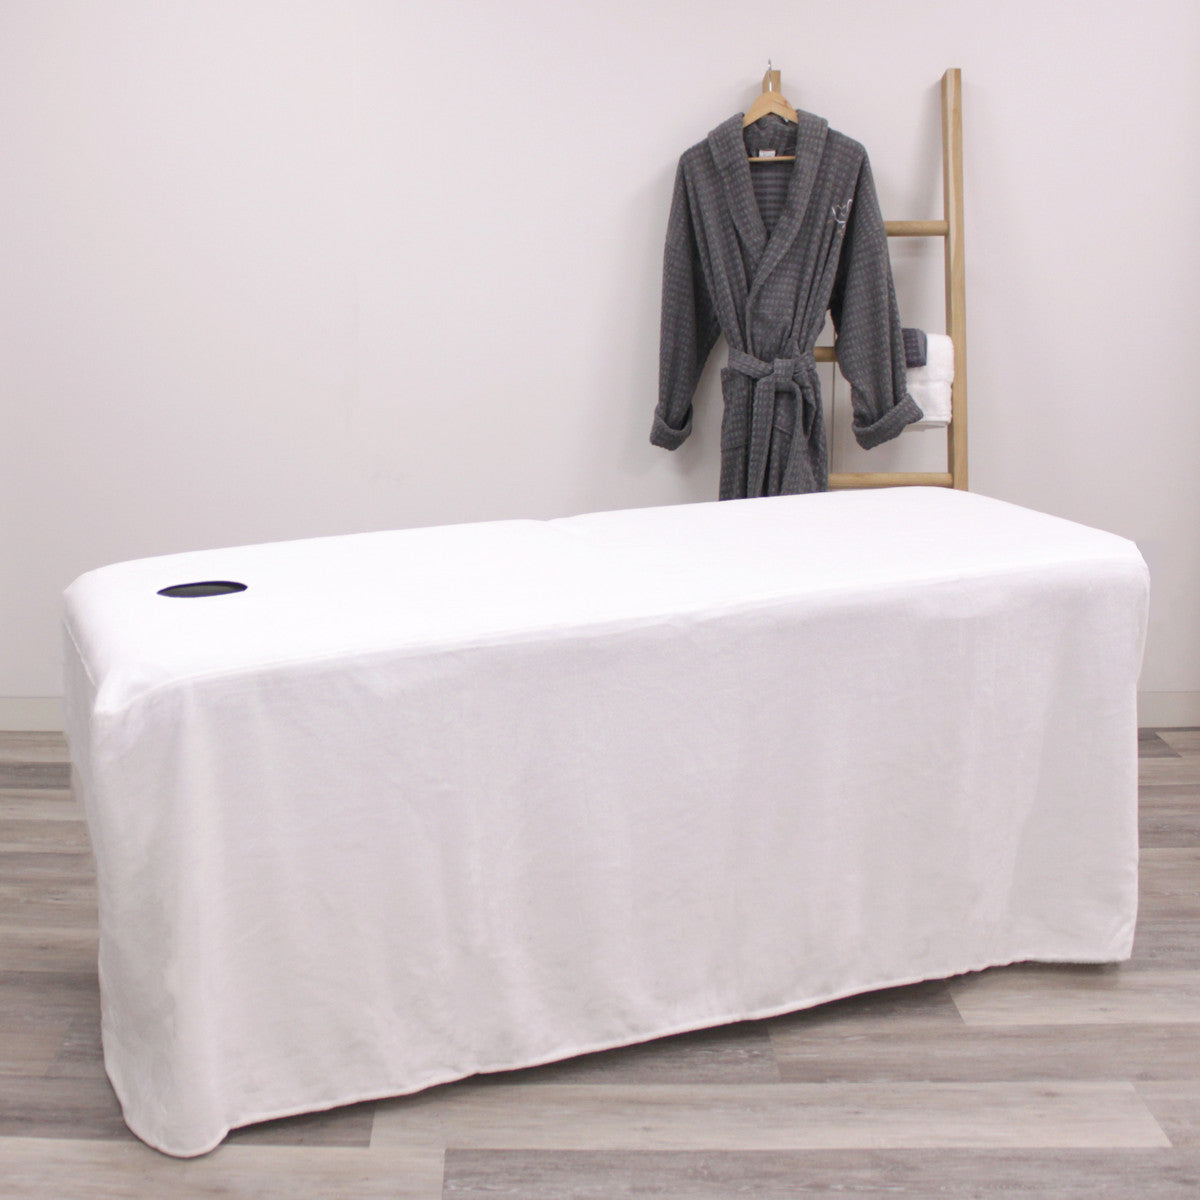 Towel - Treatment Table Cover